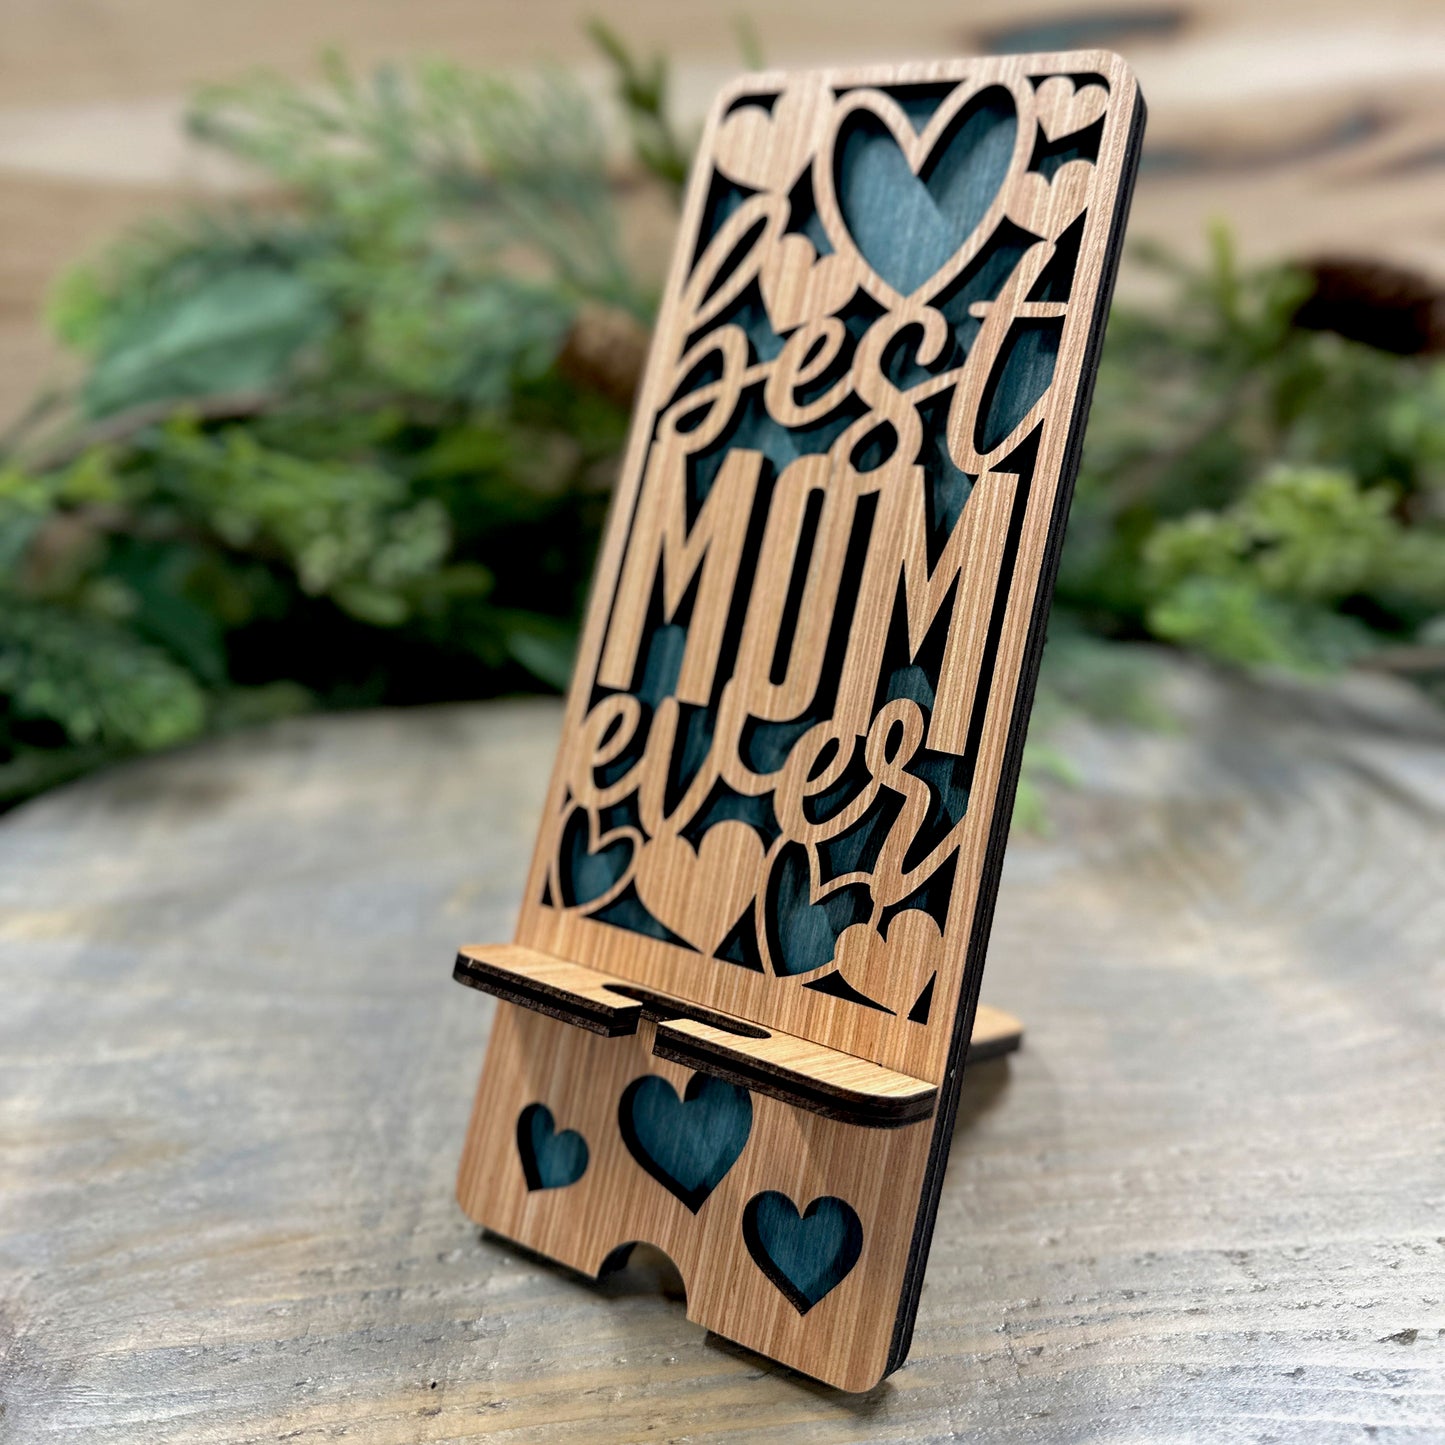 Wood Phone Stand and Decor - Best Mom Ever - Gift for Mom